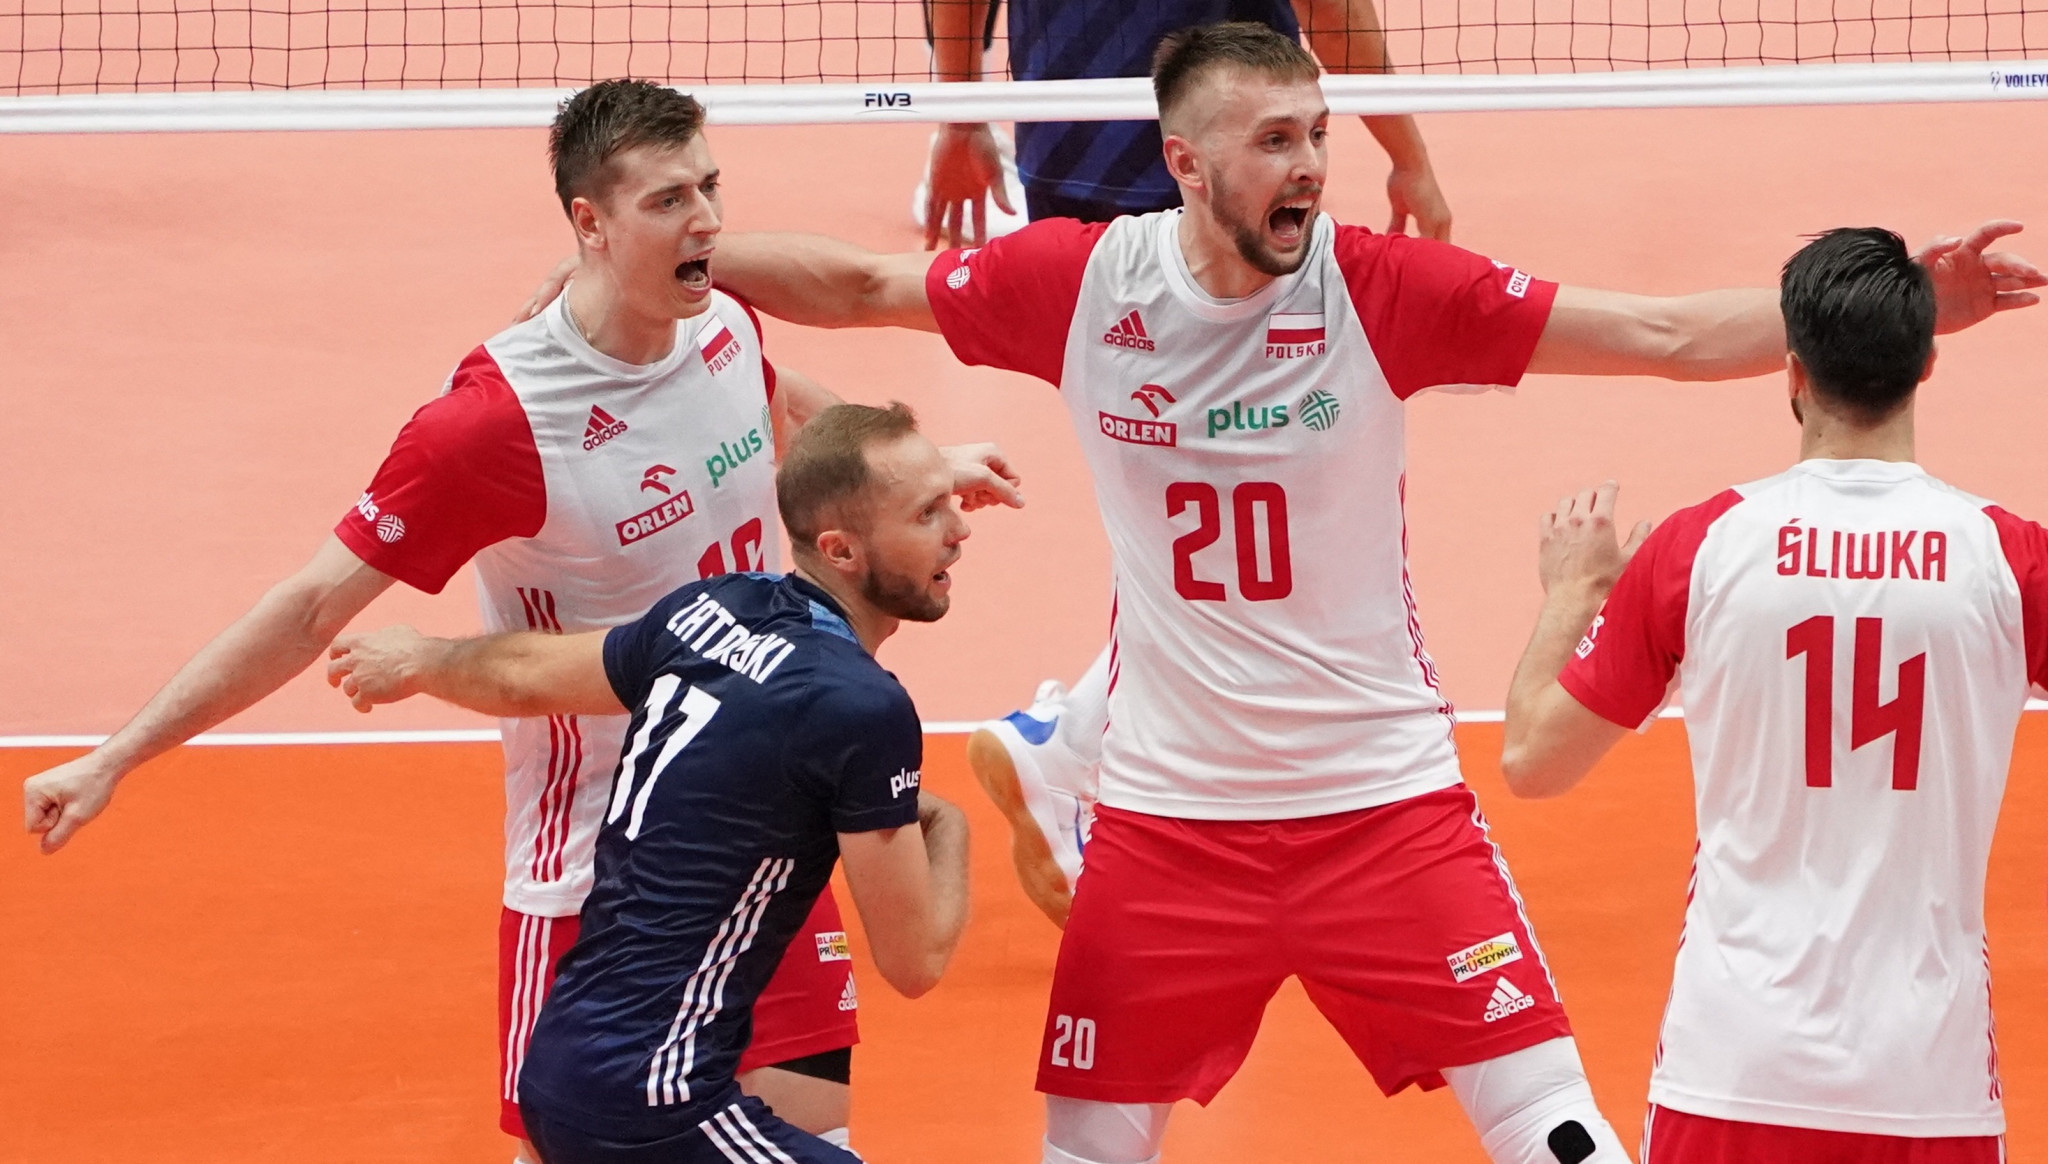 Poland hold off US to reach Men's Volleyball World Championship semi-finals